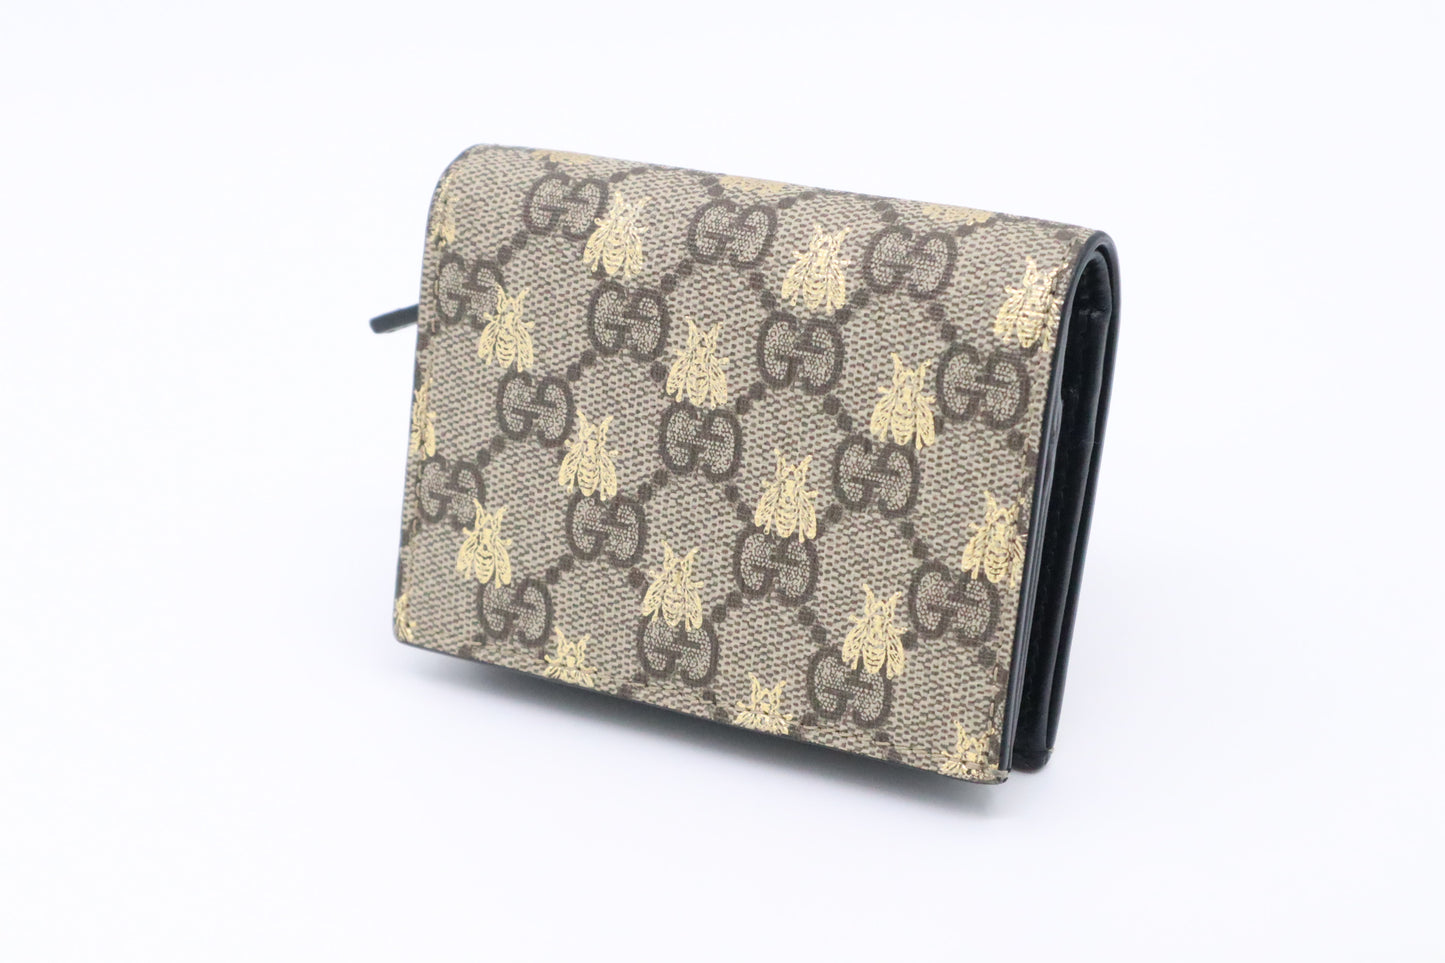 Gucci Bee Compact Wallet in GG Bee Canvas